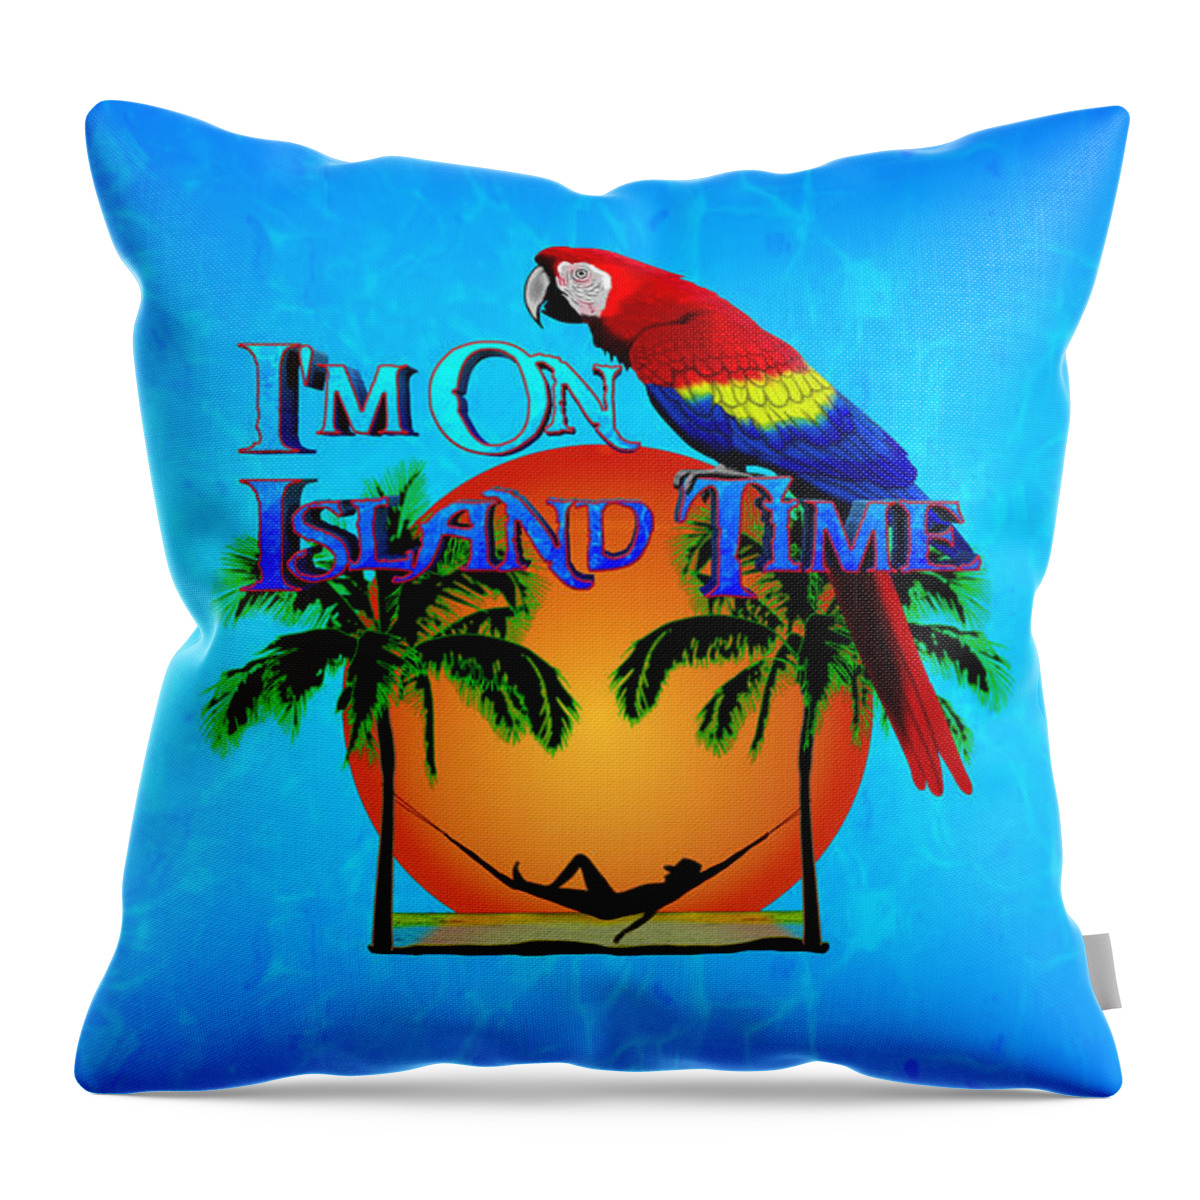 Island Throw Pillow featuring the digital art Island Time And Parrot by Chris MacDonald